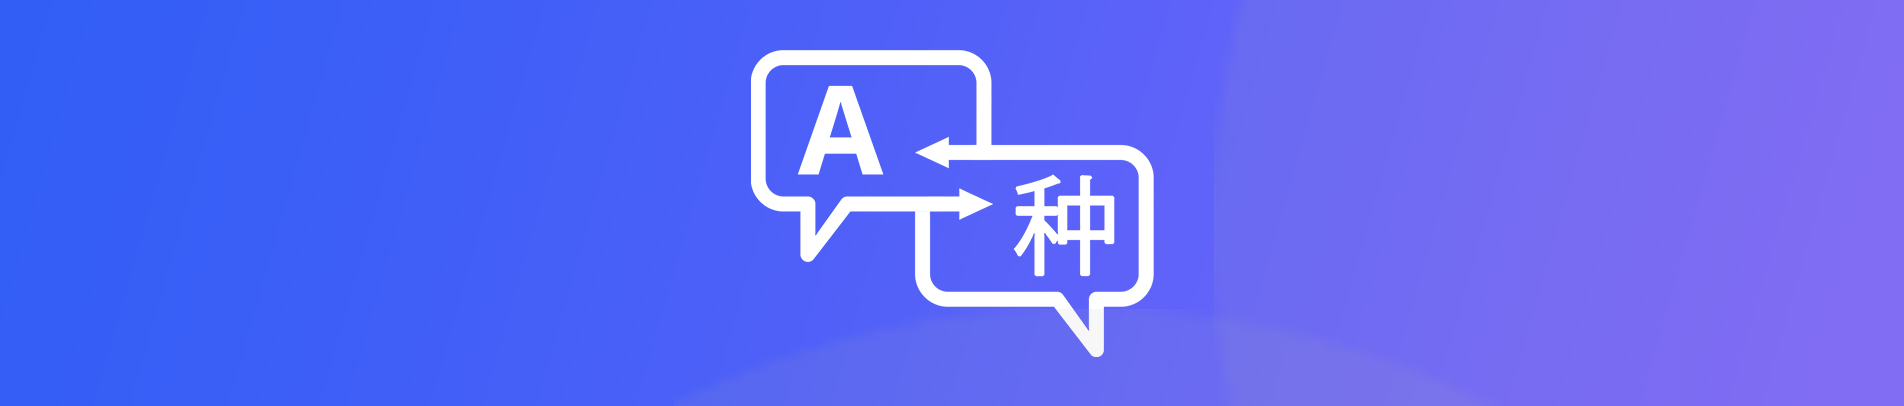 AppJetty Sets off to Make it Big in Shopify Extensions with Language Translator